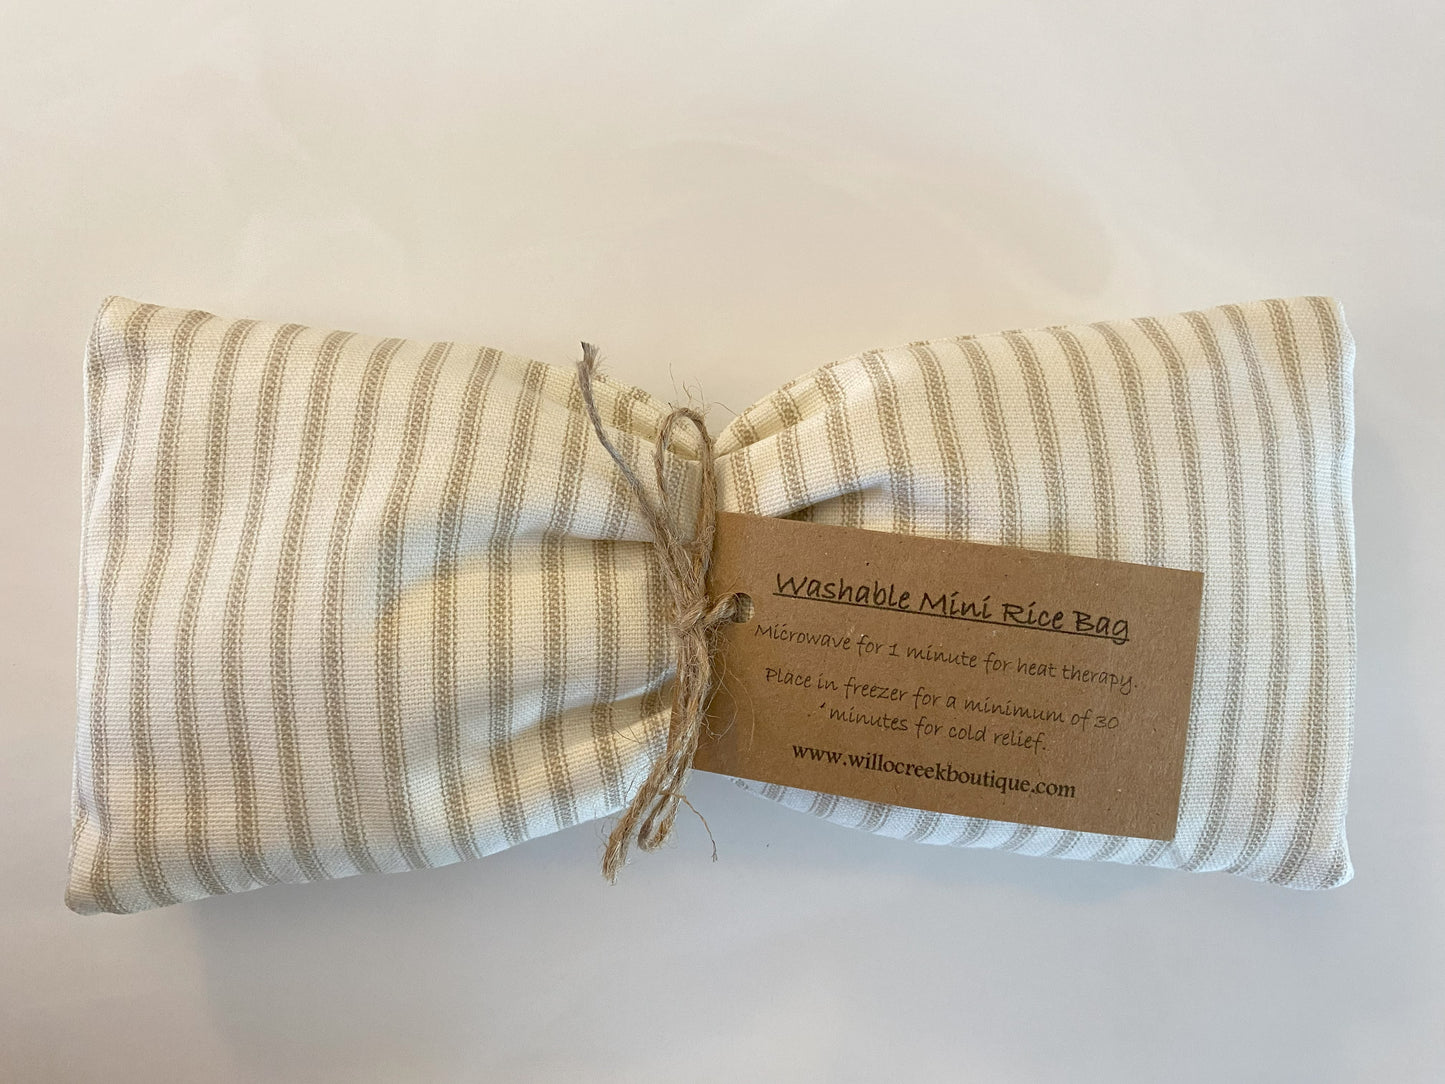 Washable Microwavable Rice Bag l Eye Pillow l Comfort Therapy Pack l Aromatherapy Bag l Stripes